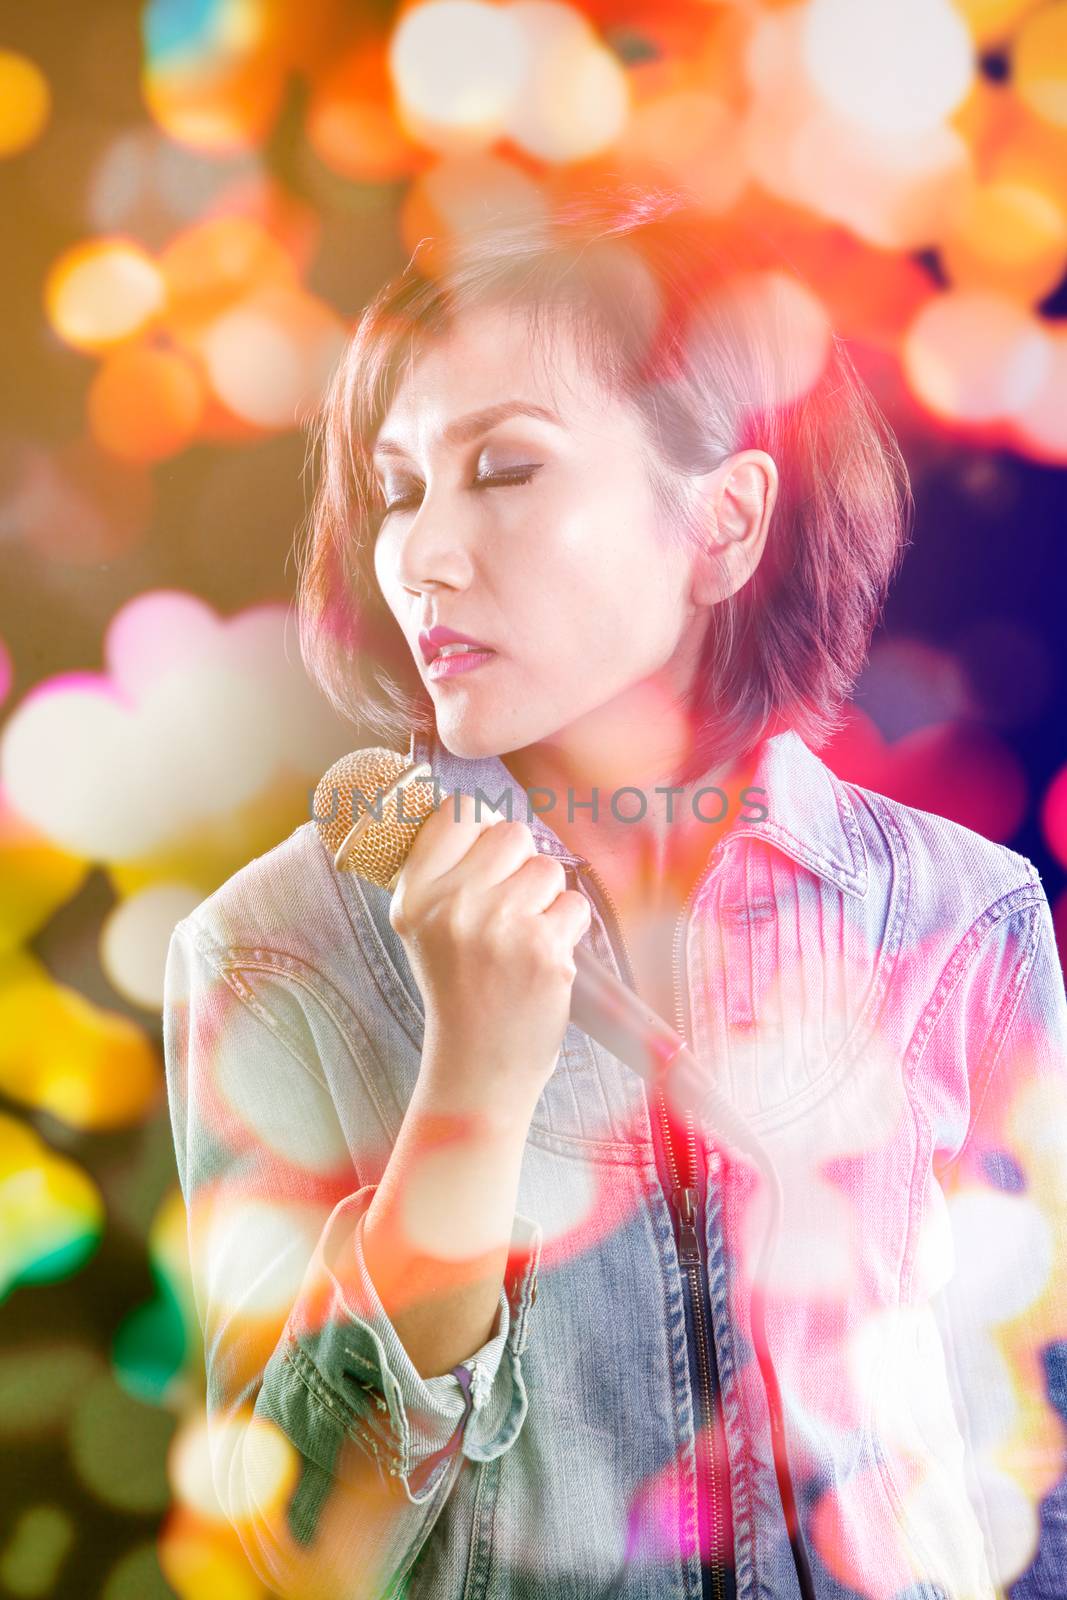 Double exposure of lady singing - nightlife concept